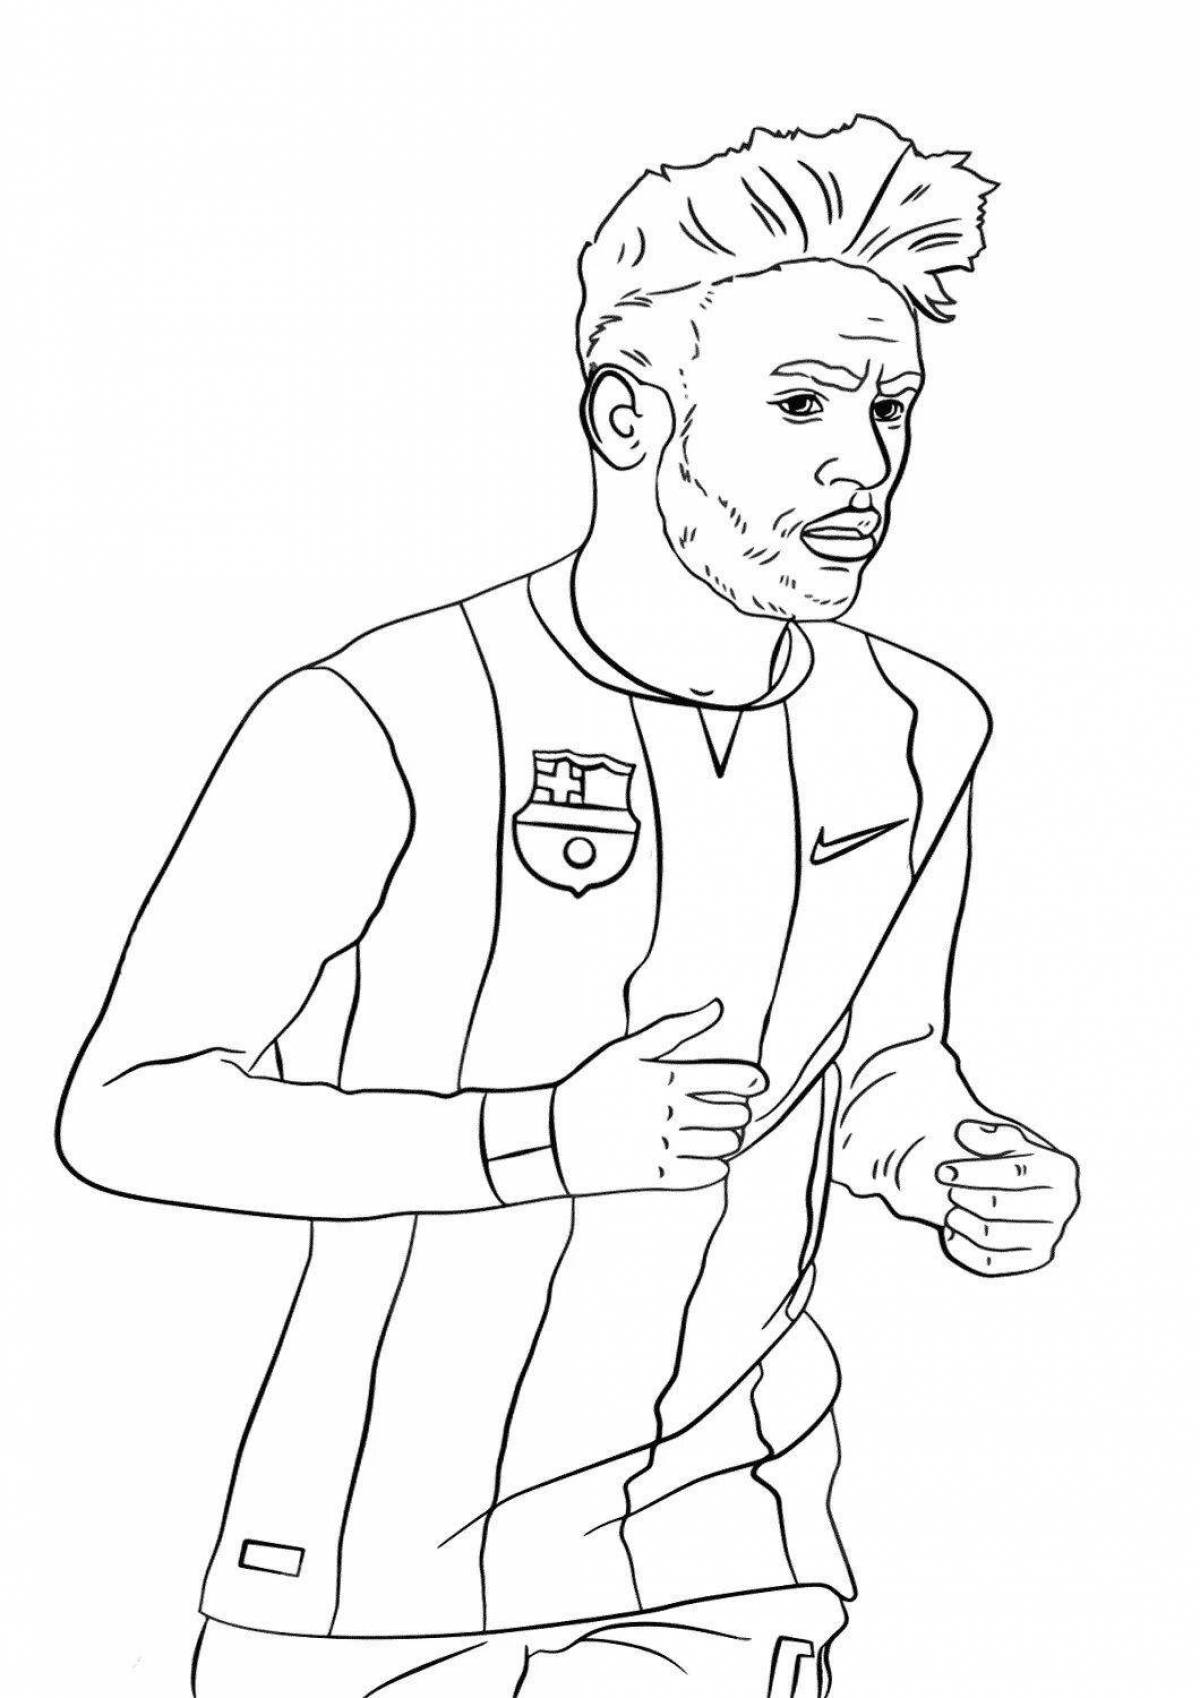 Adorable messi coloring book for kids